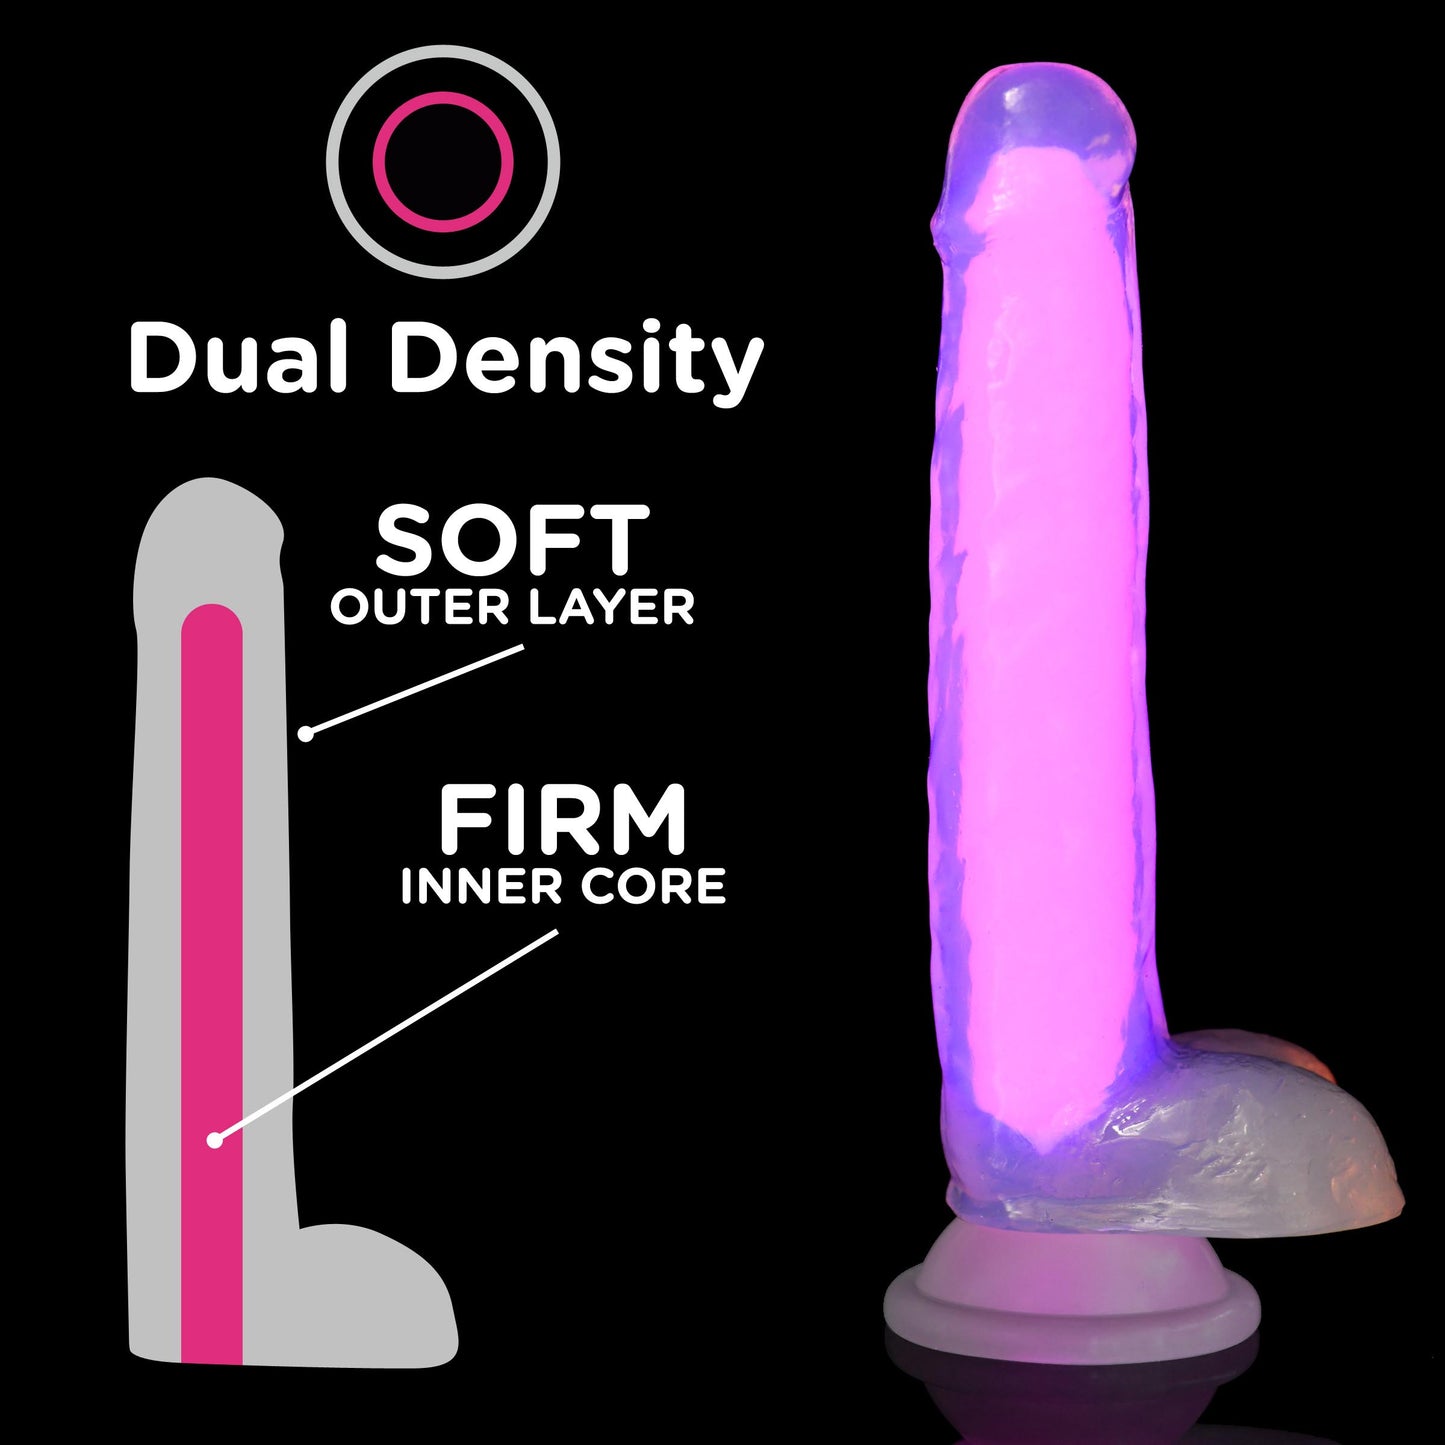 7 Inch Glow-in-the-Dark Silicone Dildo with Balls - Pink